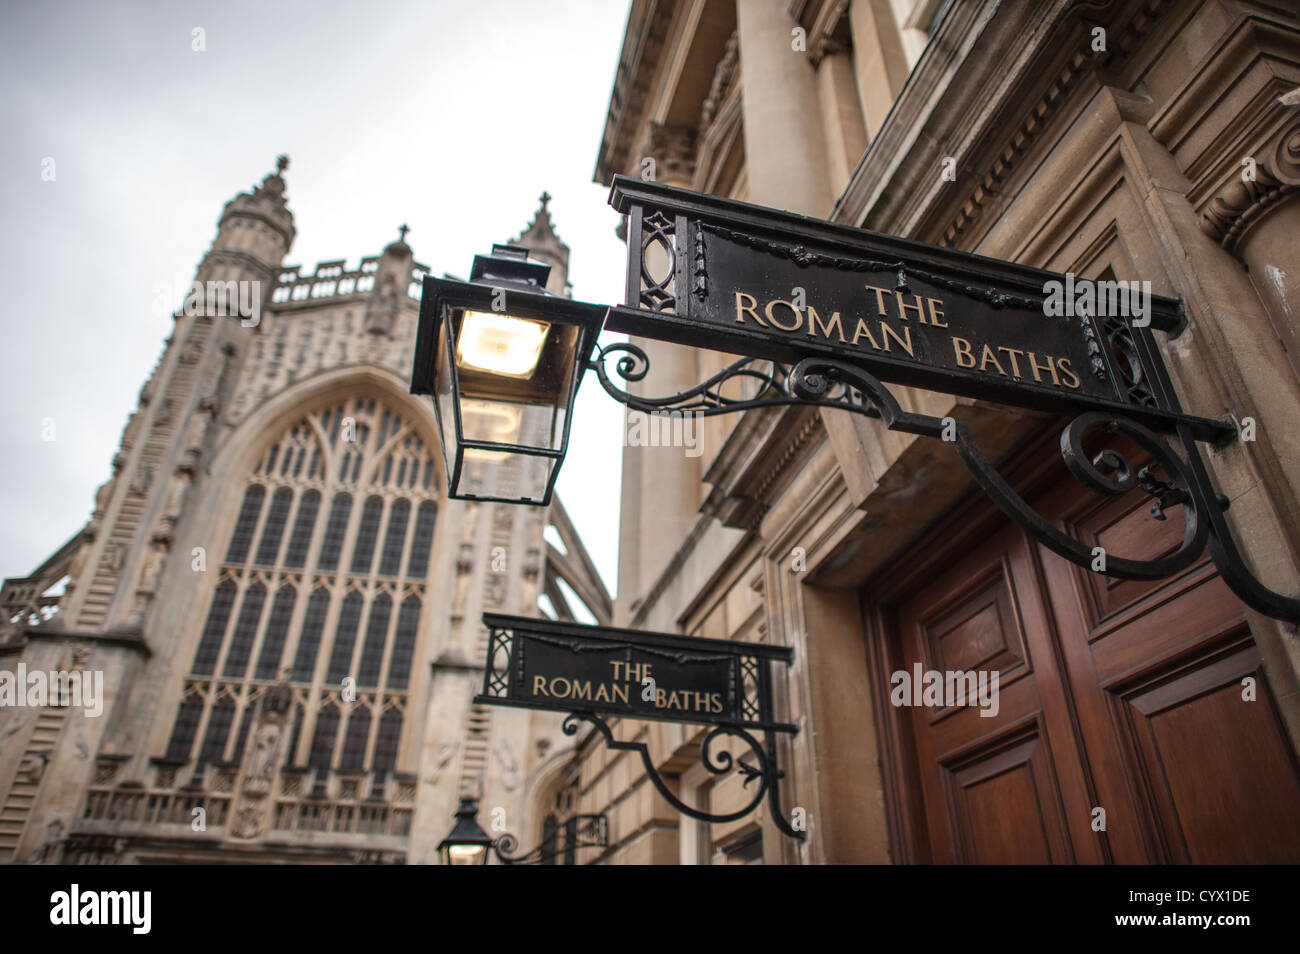 BATH, UK - The entrance to the historic Roman Baths that give the city of Bath, Somerset, its name. In the background, at left, is the tower of Bath Abbey. Stock Photo